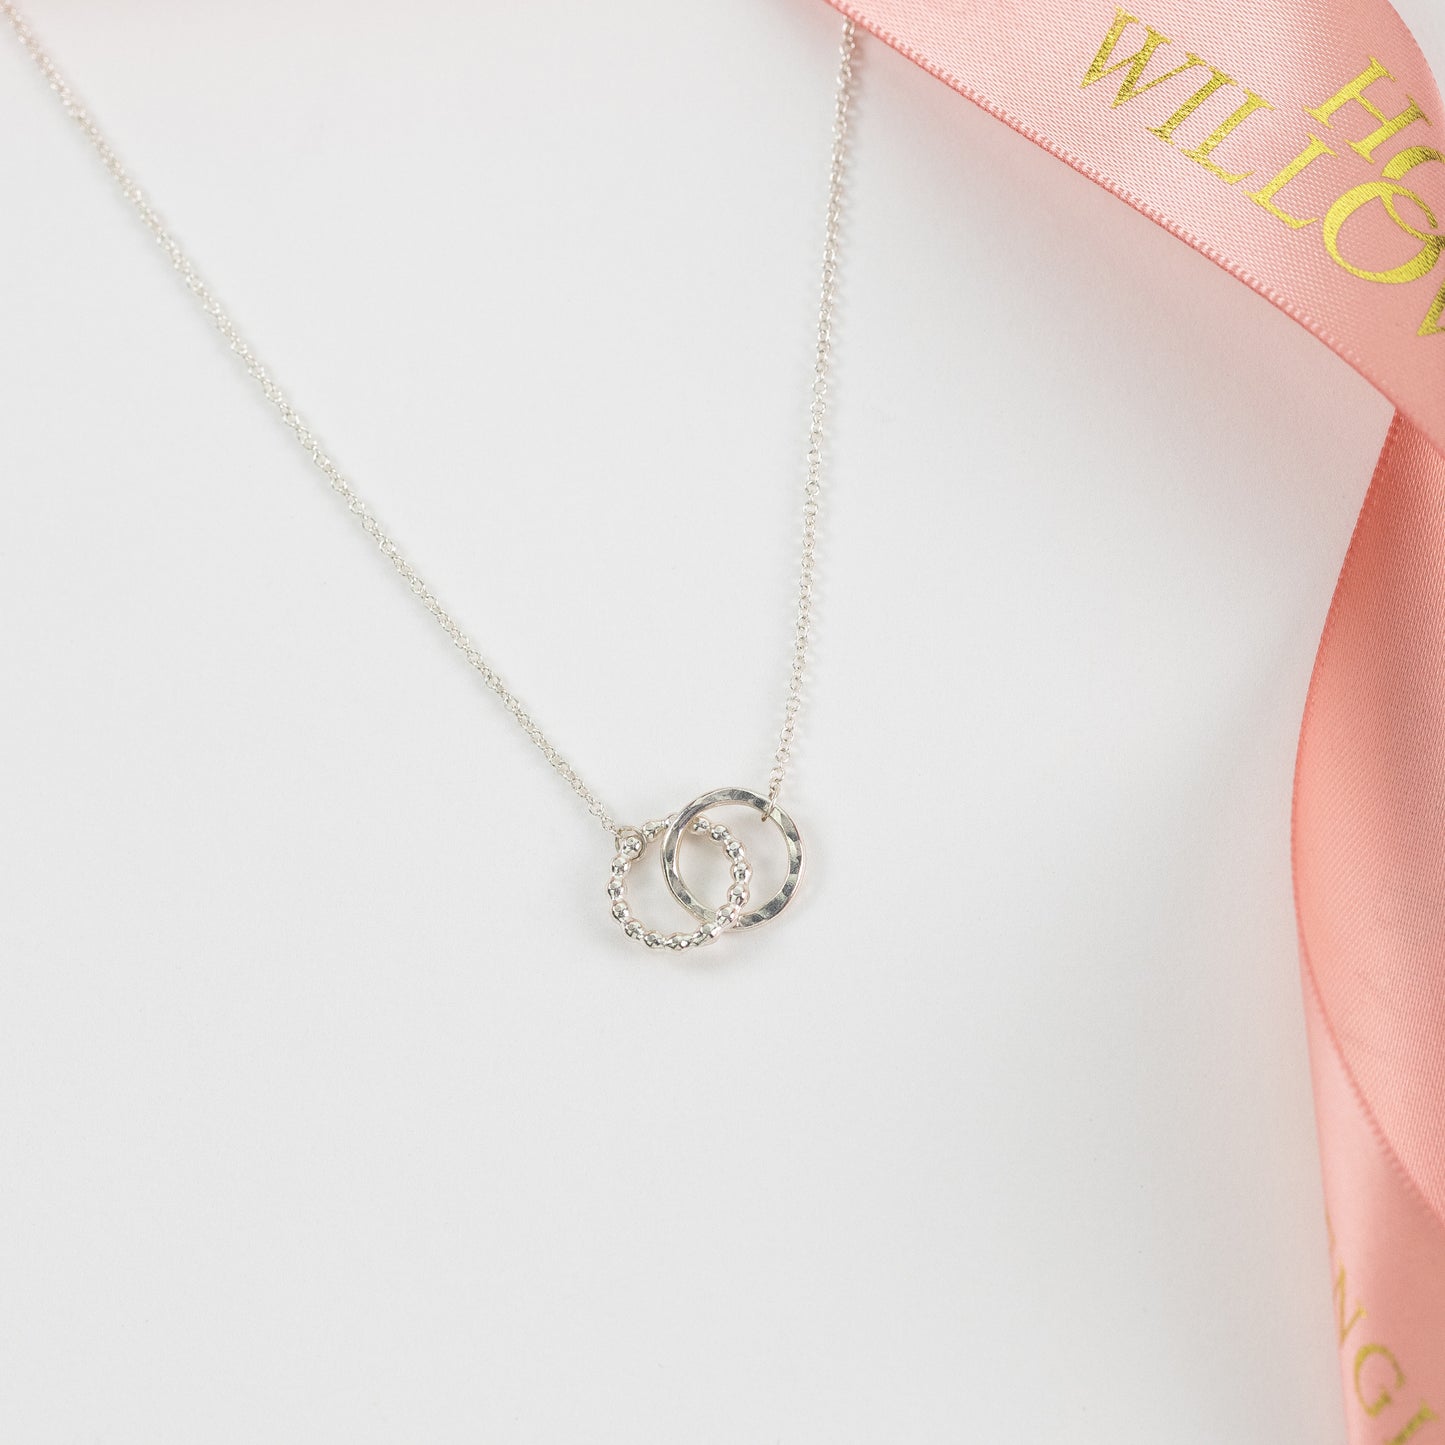 Love Link Necklace - Linked for a Lifetime - Silver